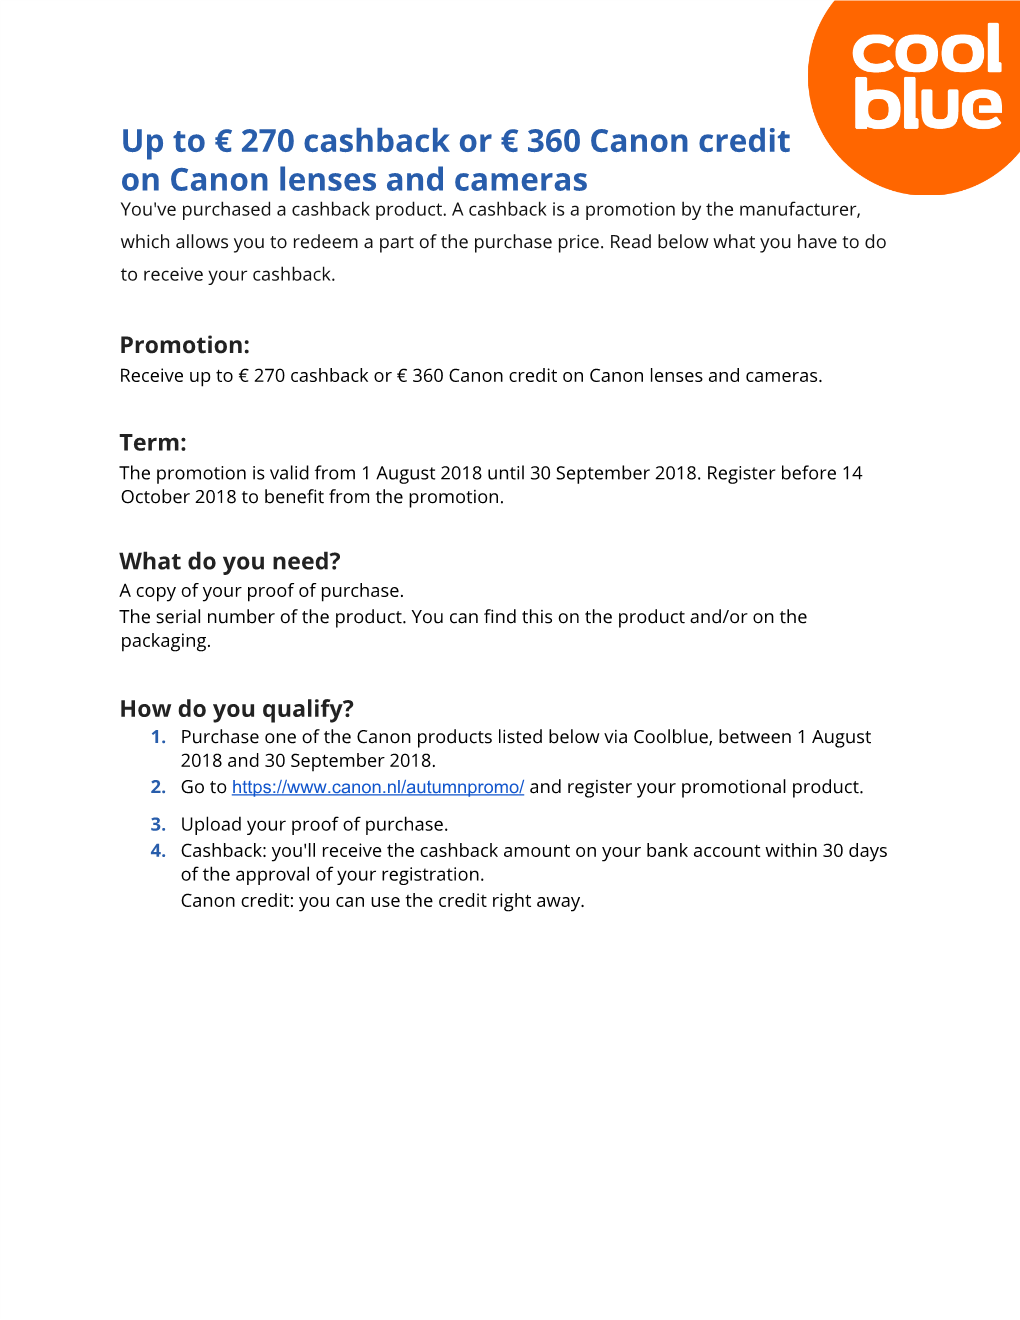 Up to € 270 Cashback Or € 360 Canon Credit on Canon Lenses and Cameras You've Purchased a Cashback Product